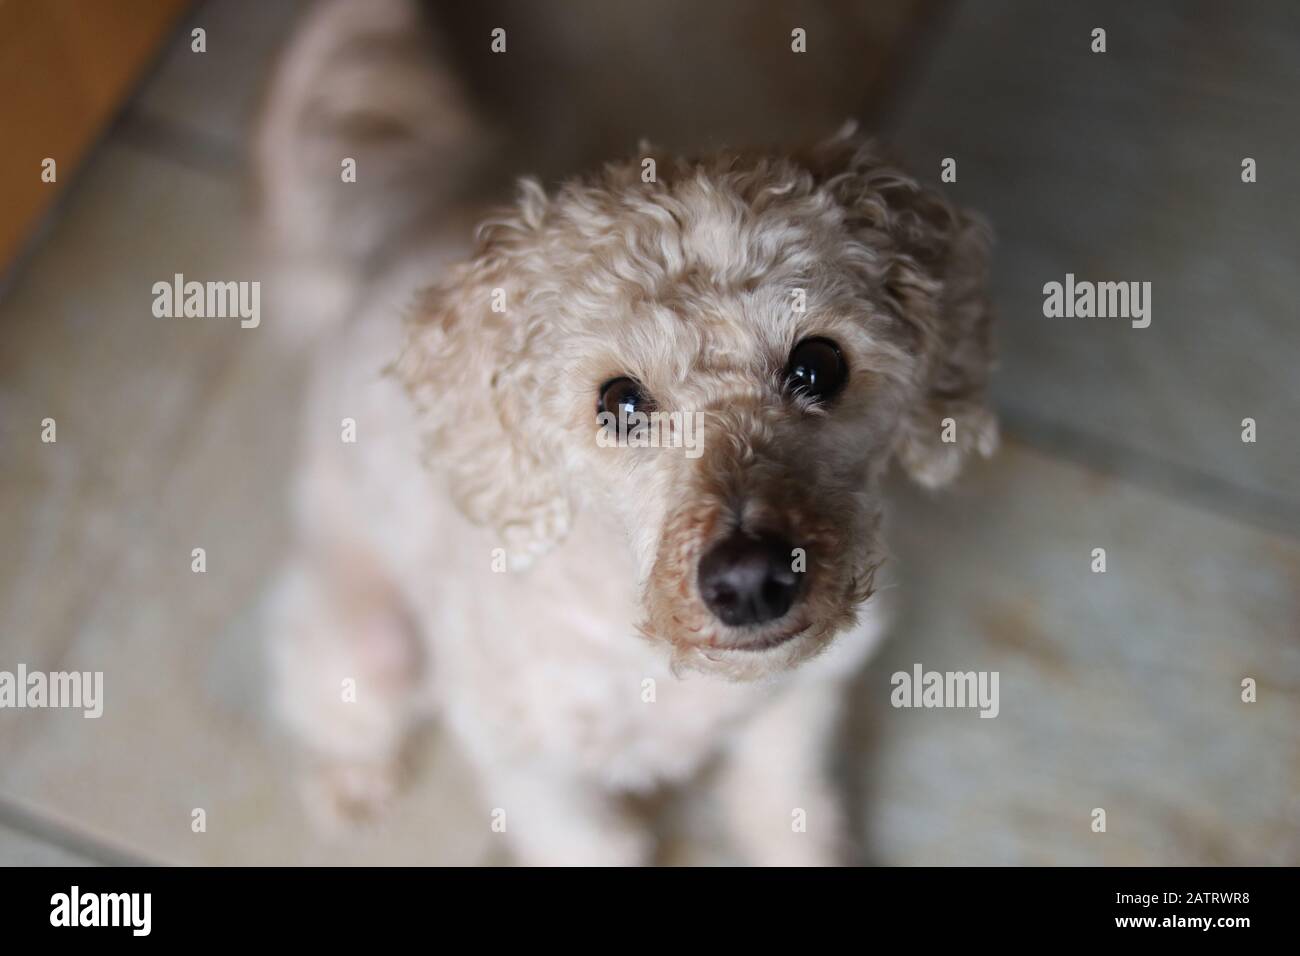 Miniature toy poodle, cute poodle looking at camera in frontal close up, apricot poodle, brown eyes with a black snout, toy poodle Stock Photo